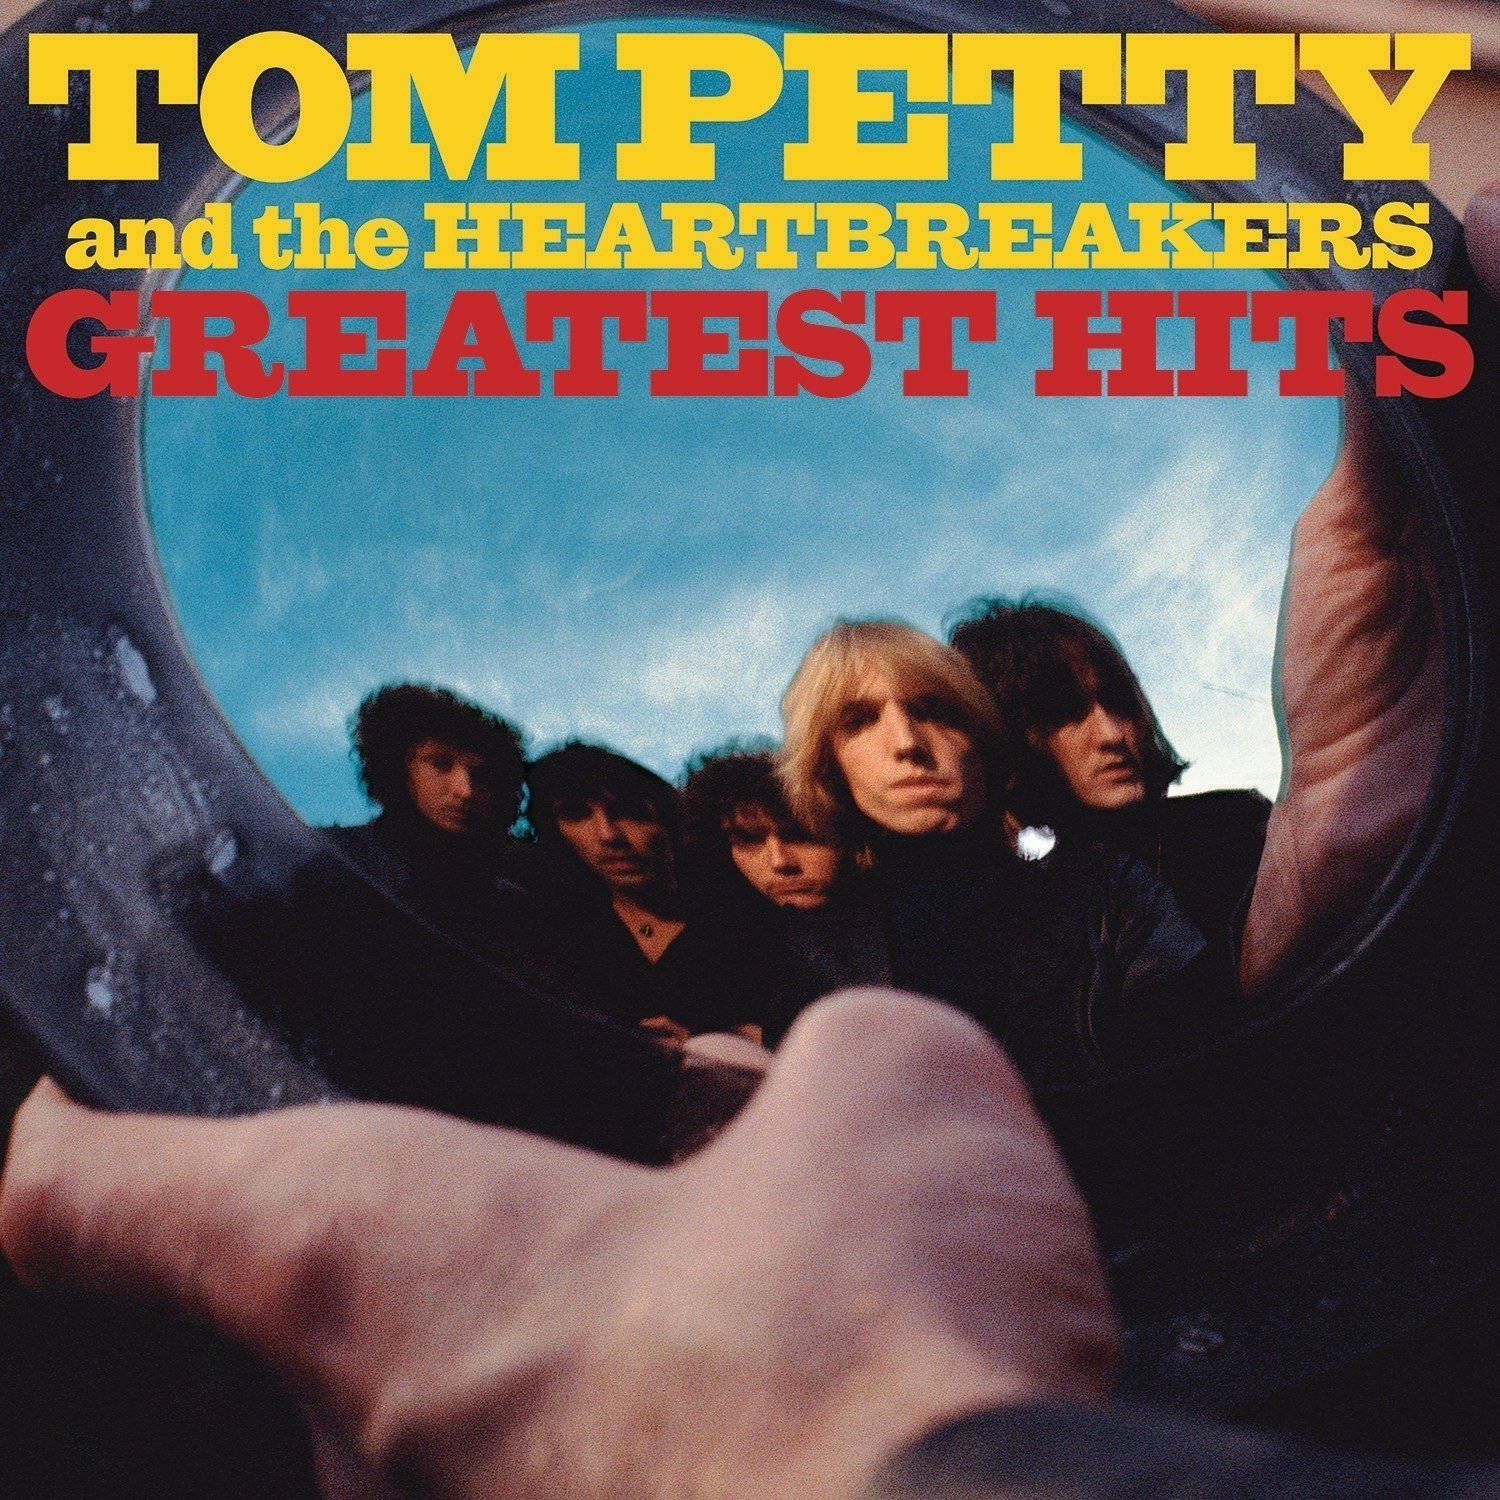 Tom Petty And The Heartbreakers' Greatest Hits Album Cover Wallpaper